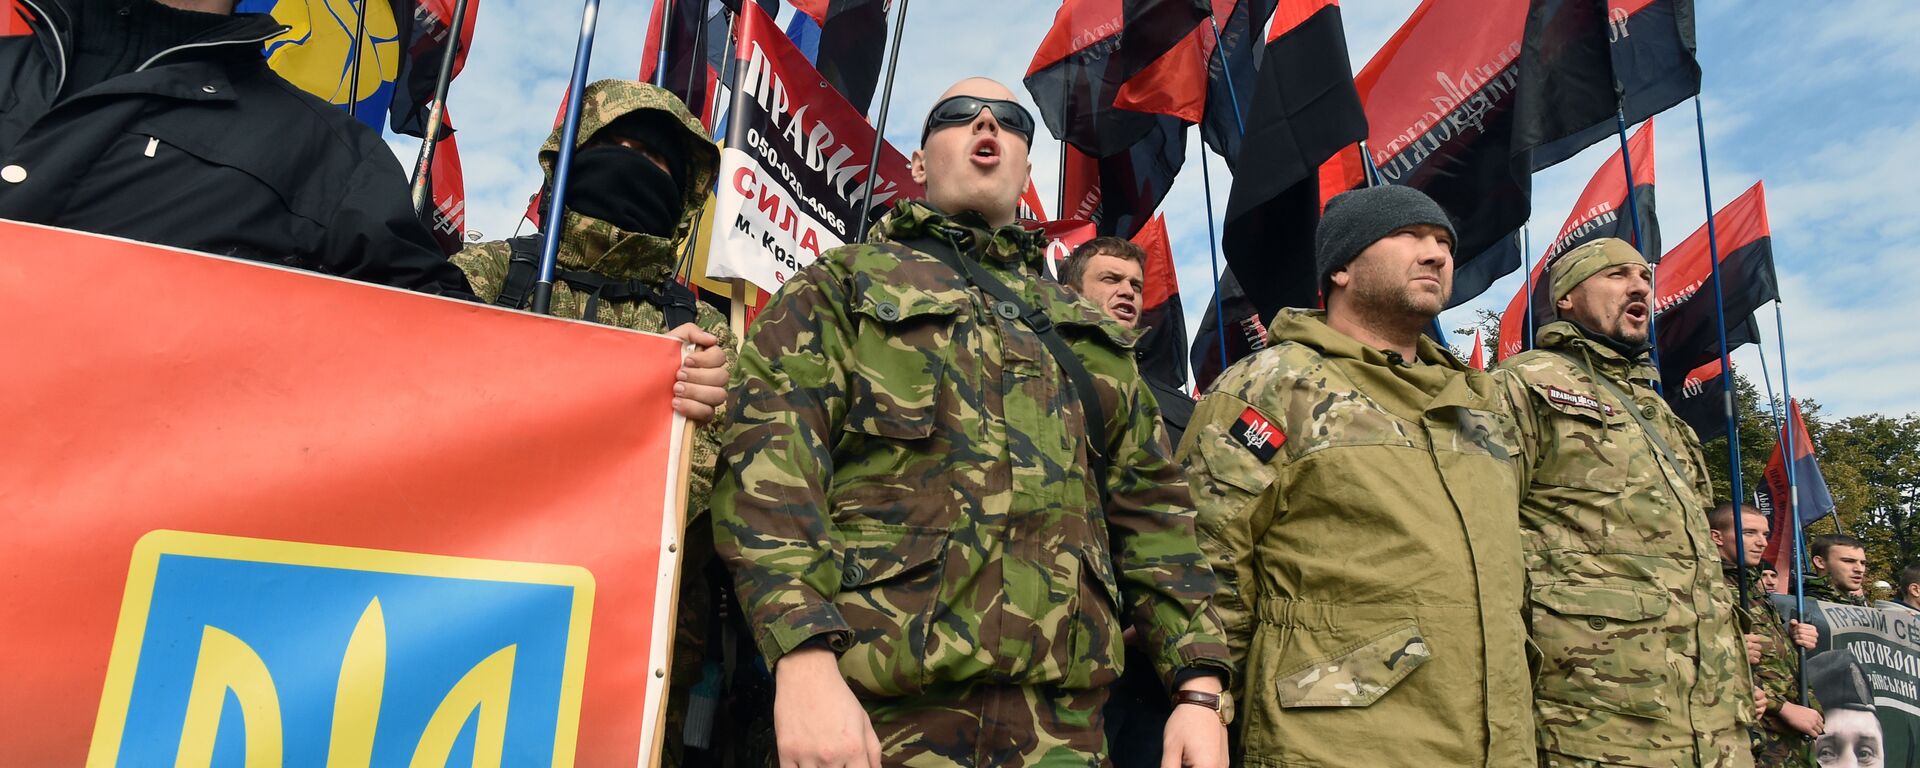 Members of far right movement Right Sector and supporters of nationalists parties wave flags as they attend a rally in Kiev on October 14, 2015 - Sputnik International, 1920, 03.05.2022